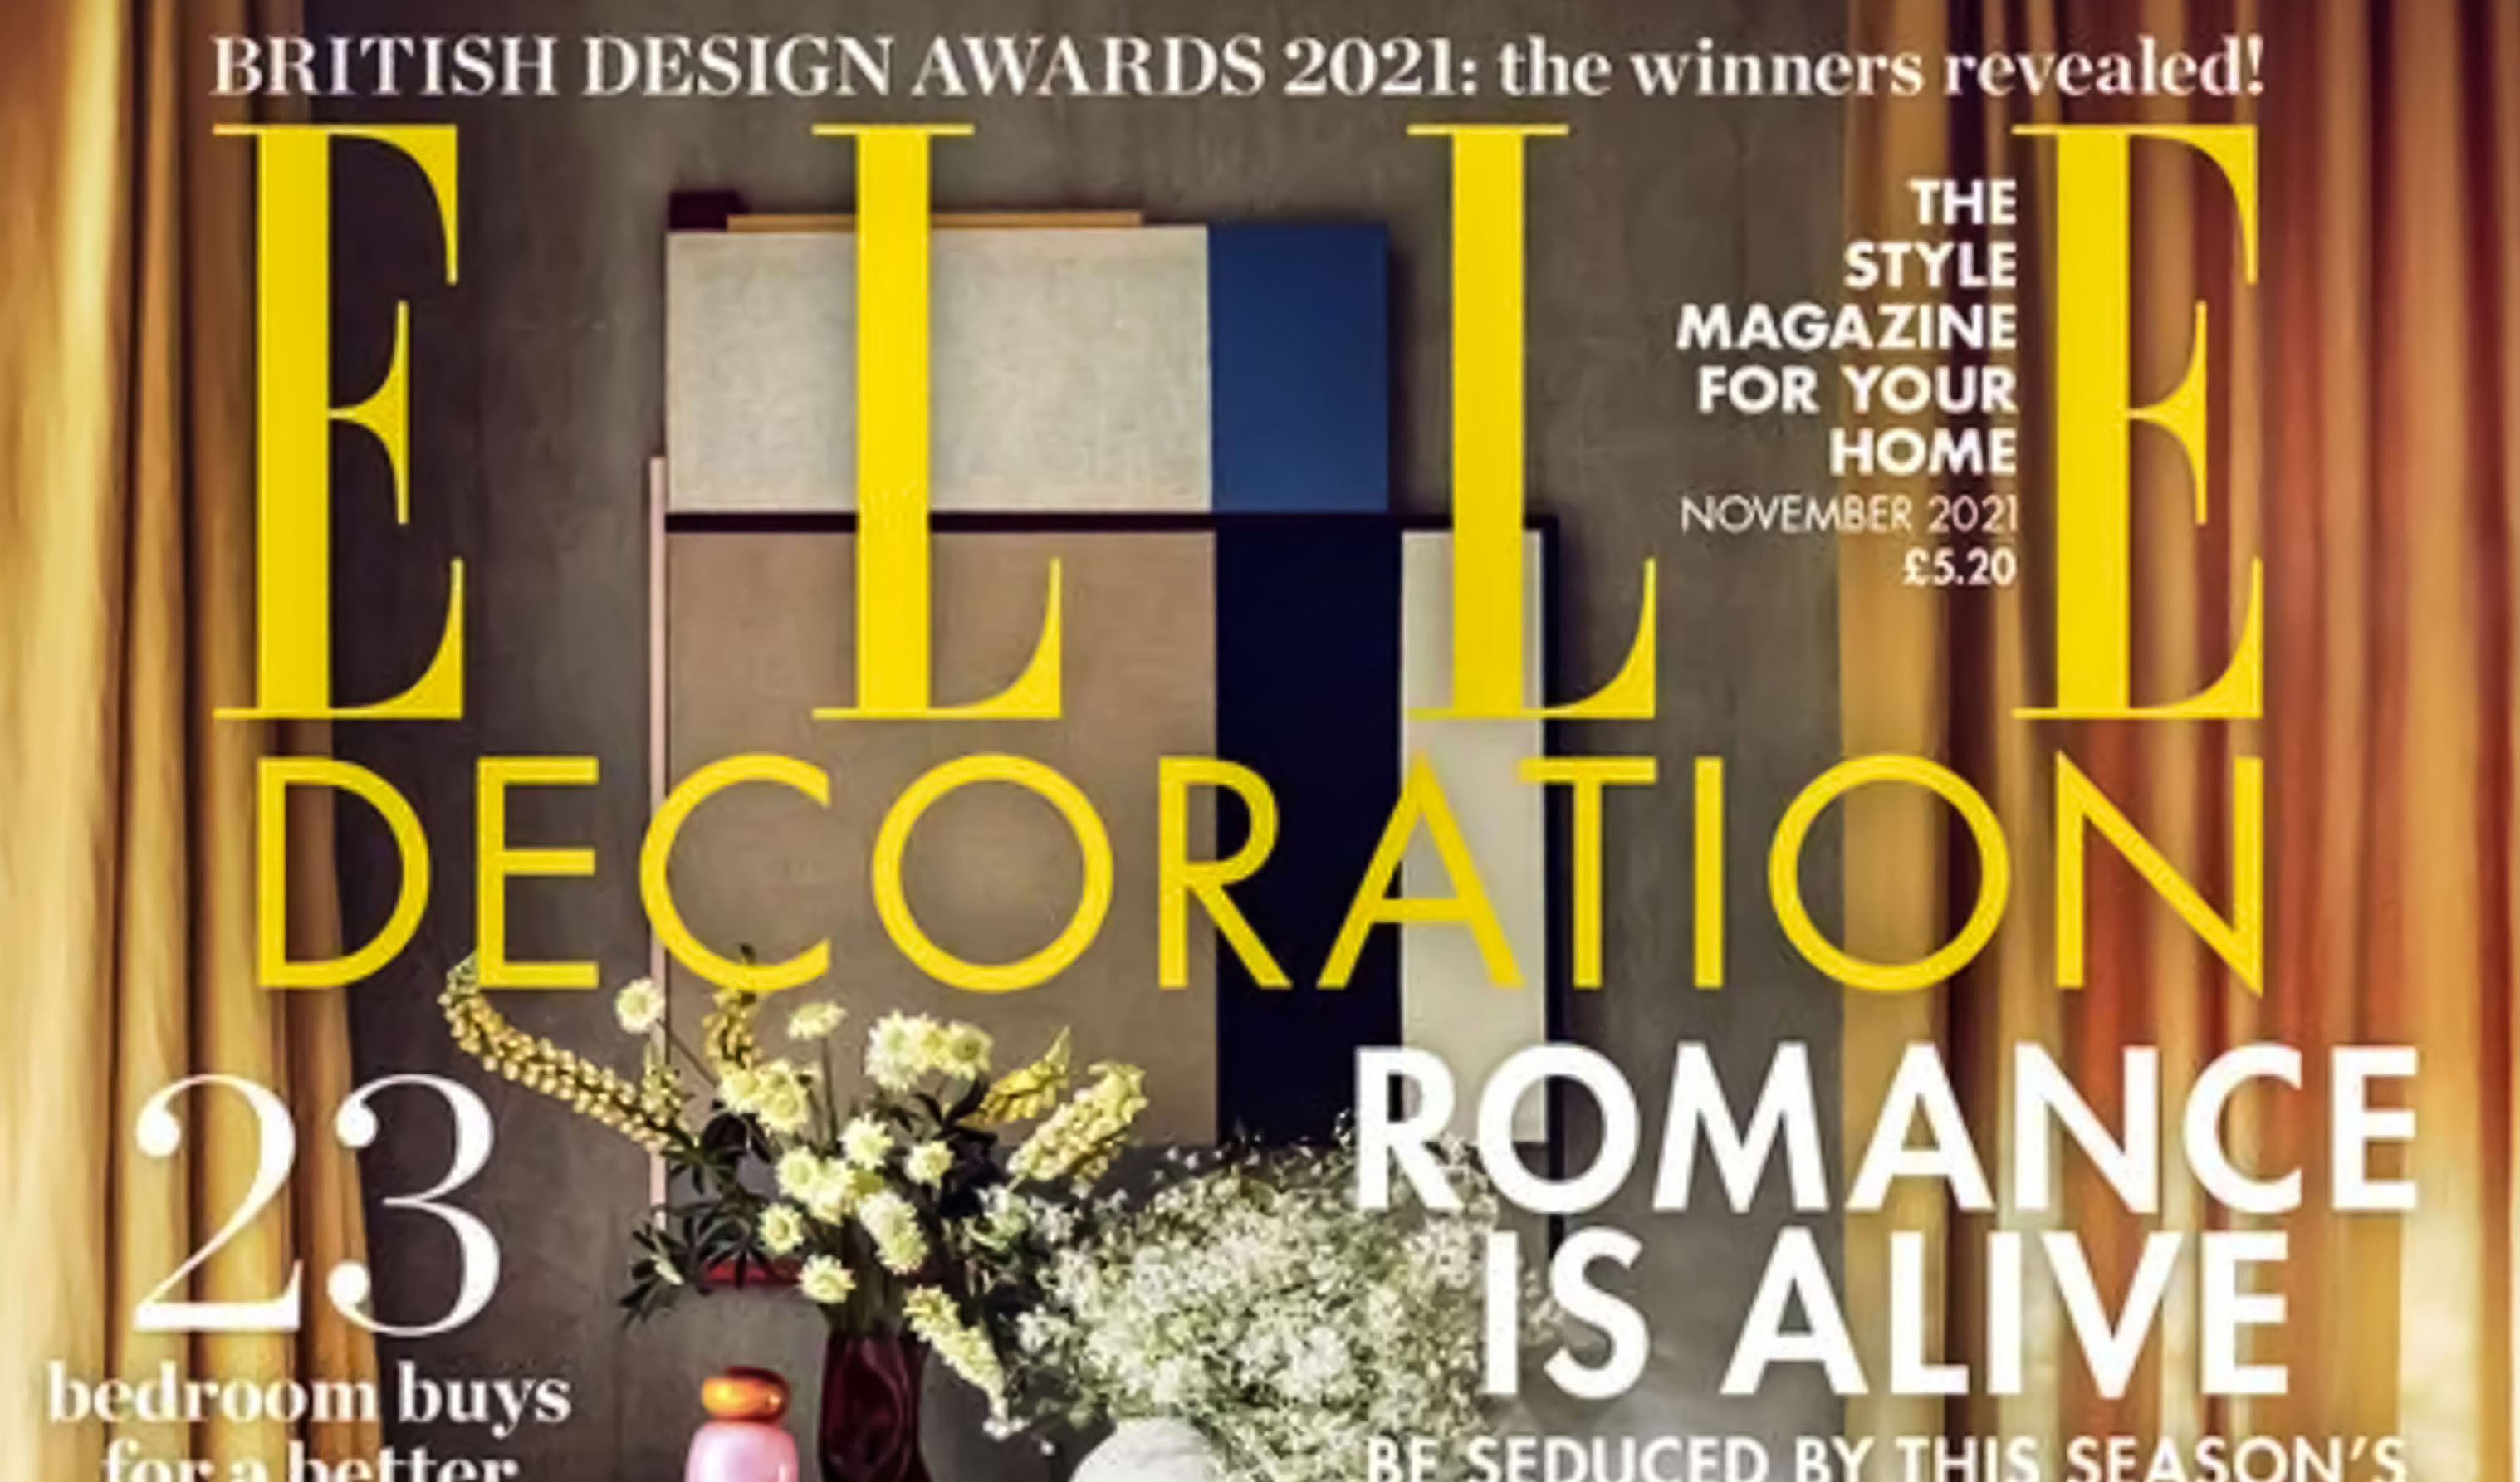 October Feature: The Cotswold Bed Company in Elle Decoration